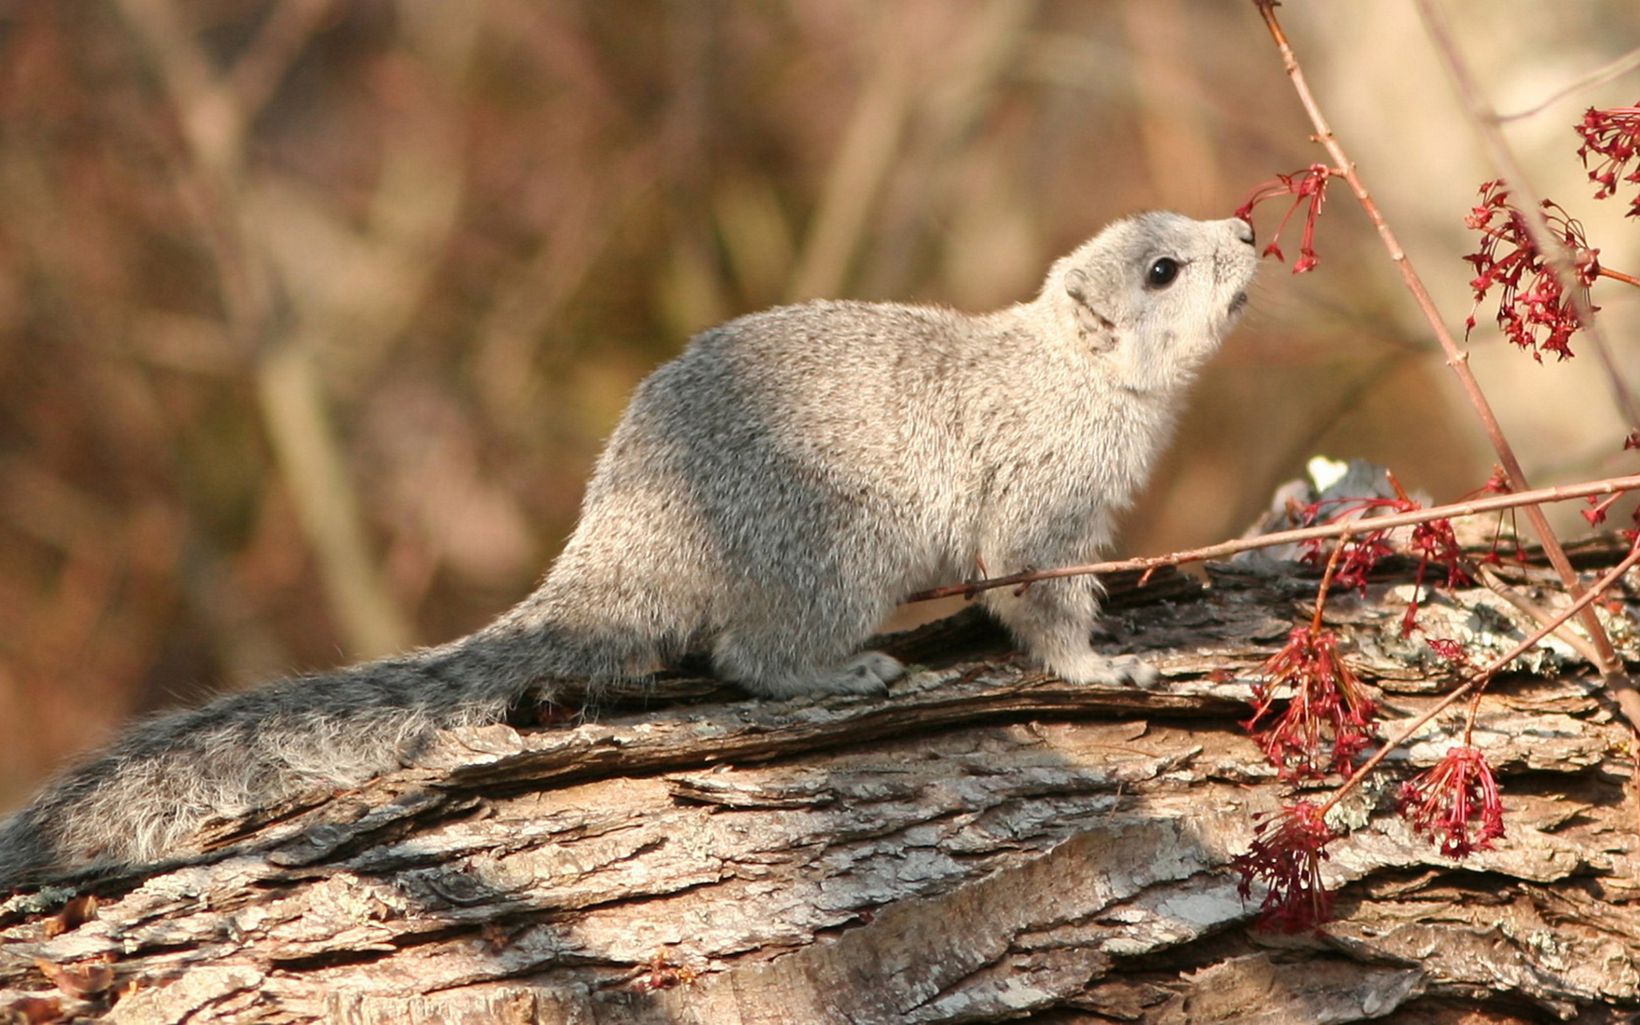 A small gray-brown fox squirrel stands on a fallen log. The tip of its nose touches a red blossom growing on a brown woody stem.